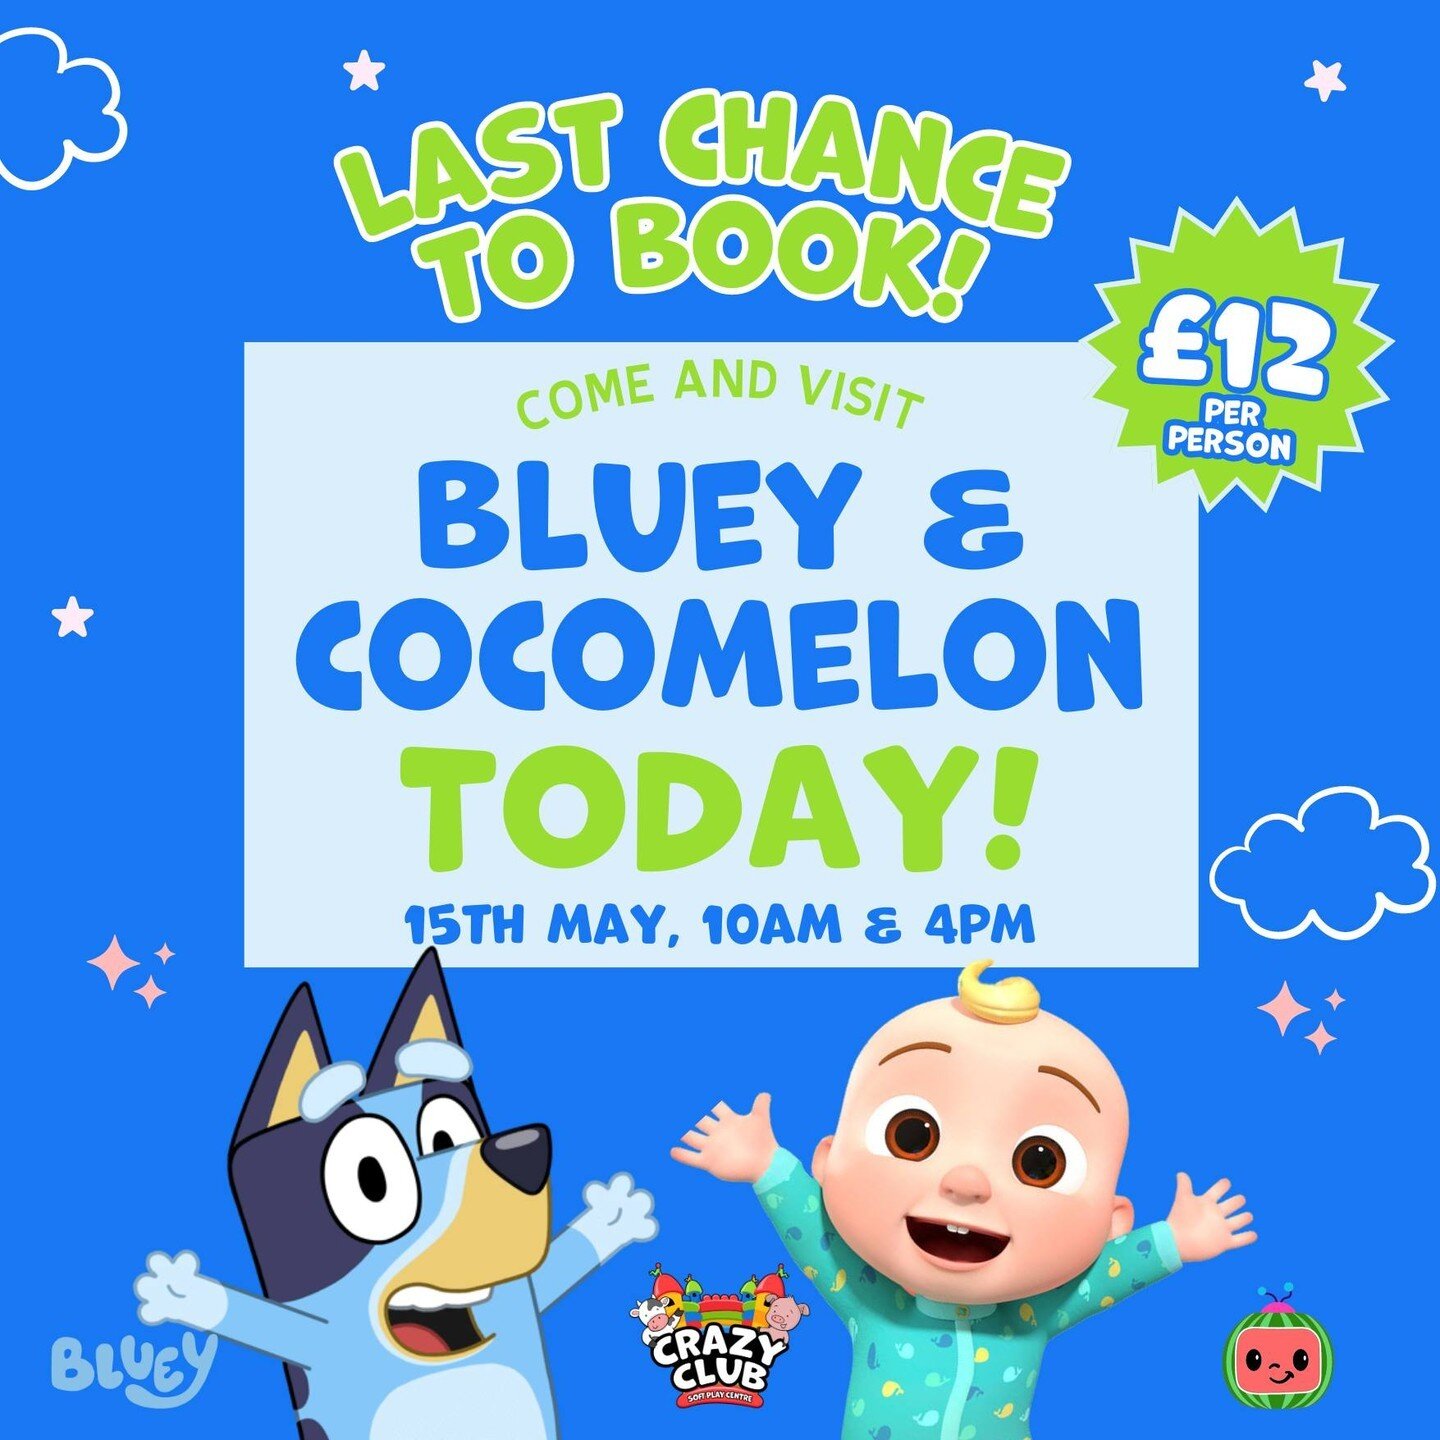 🎉 It's finally here! Our meet and greet with JJ from Cocomelon and Bluey is happening today! 🤩 Bring your little ones along for a day filled with singing, dancing, and playing with their favourite cartoon characters.

If you cant make the 10am slot